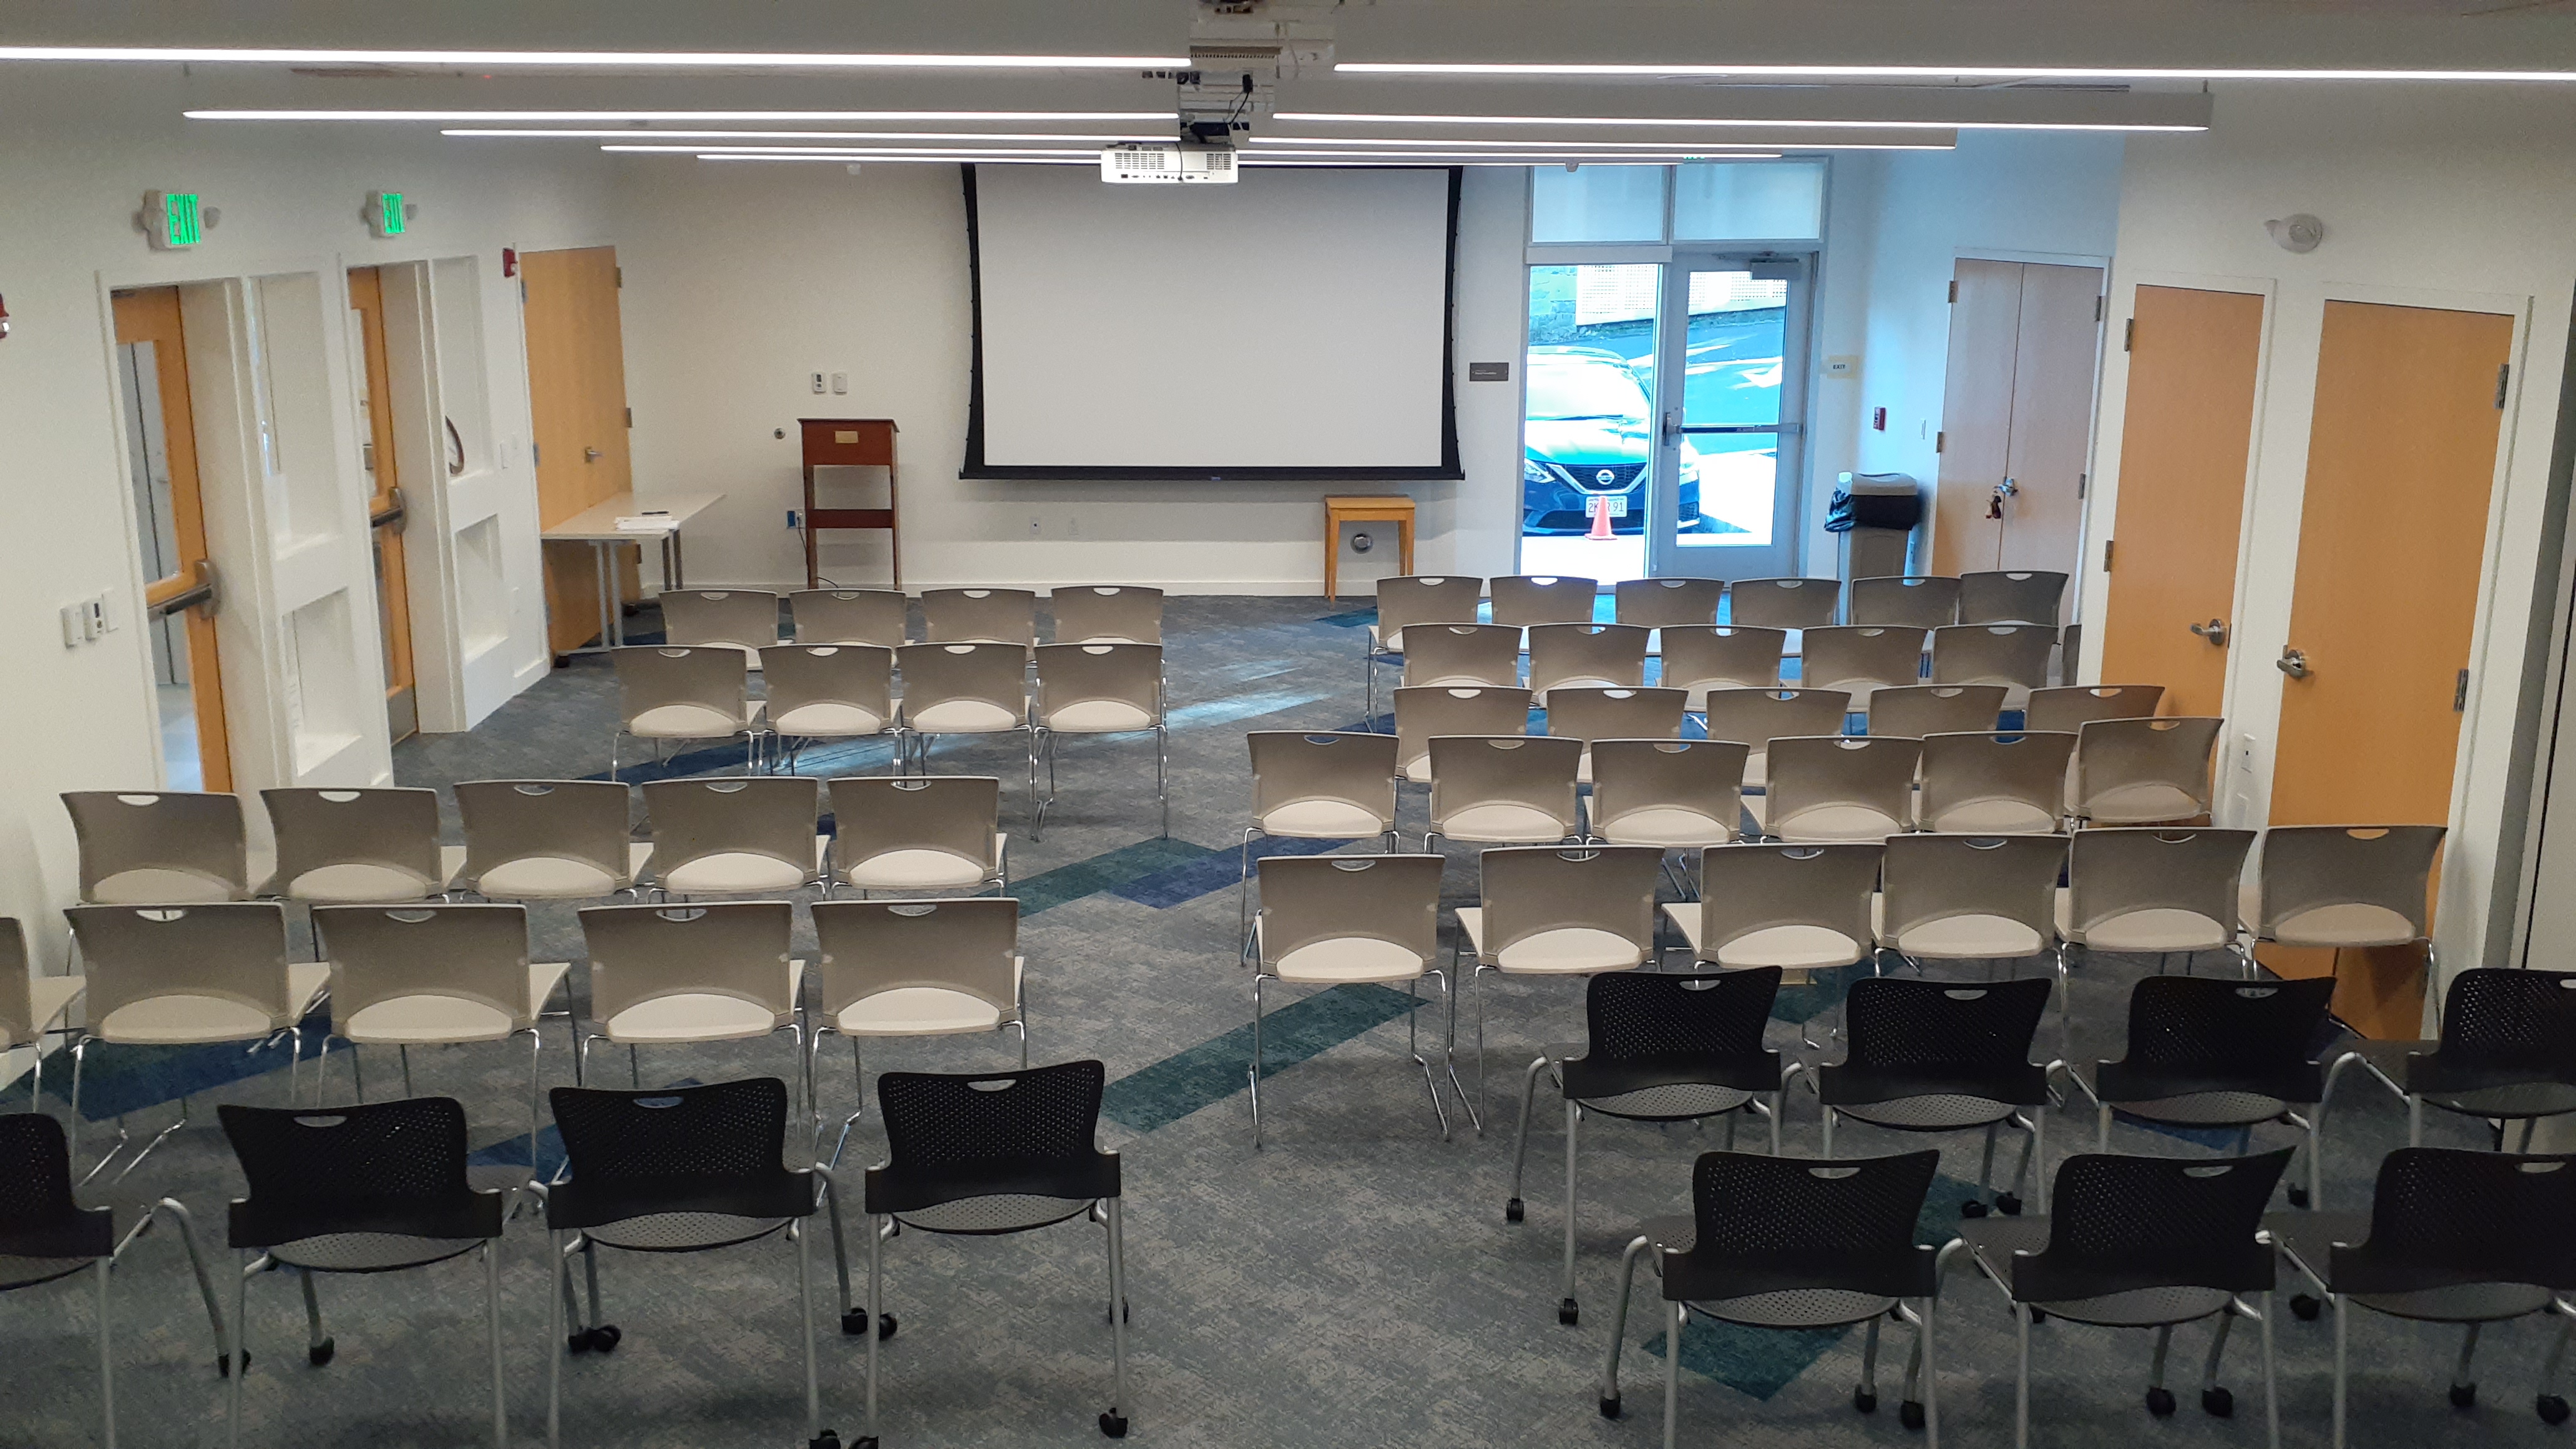 View of the Community Room from the back, with sveral chairs set up facing the projection screen on the front wall